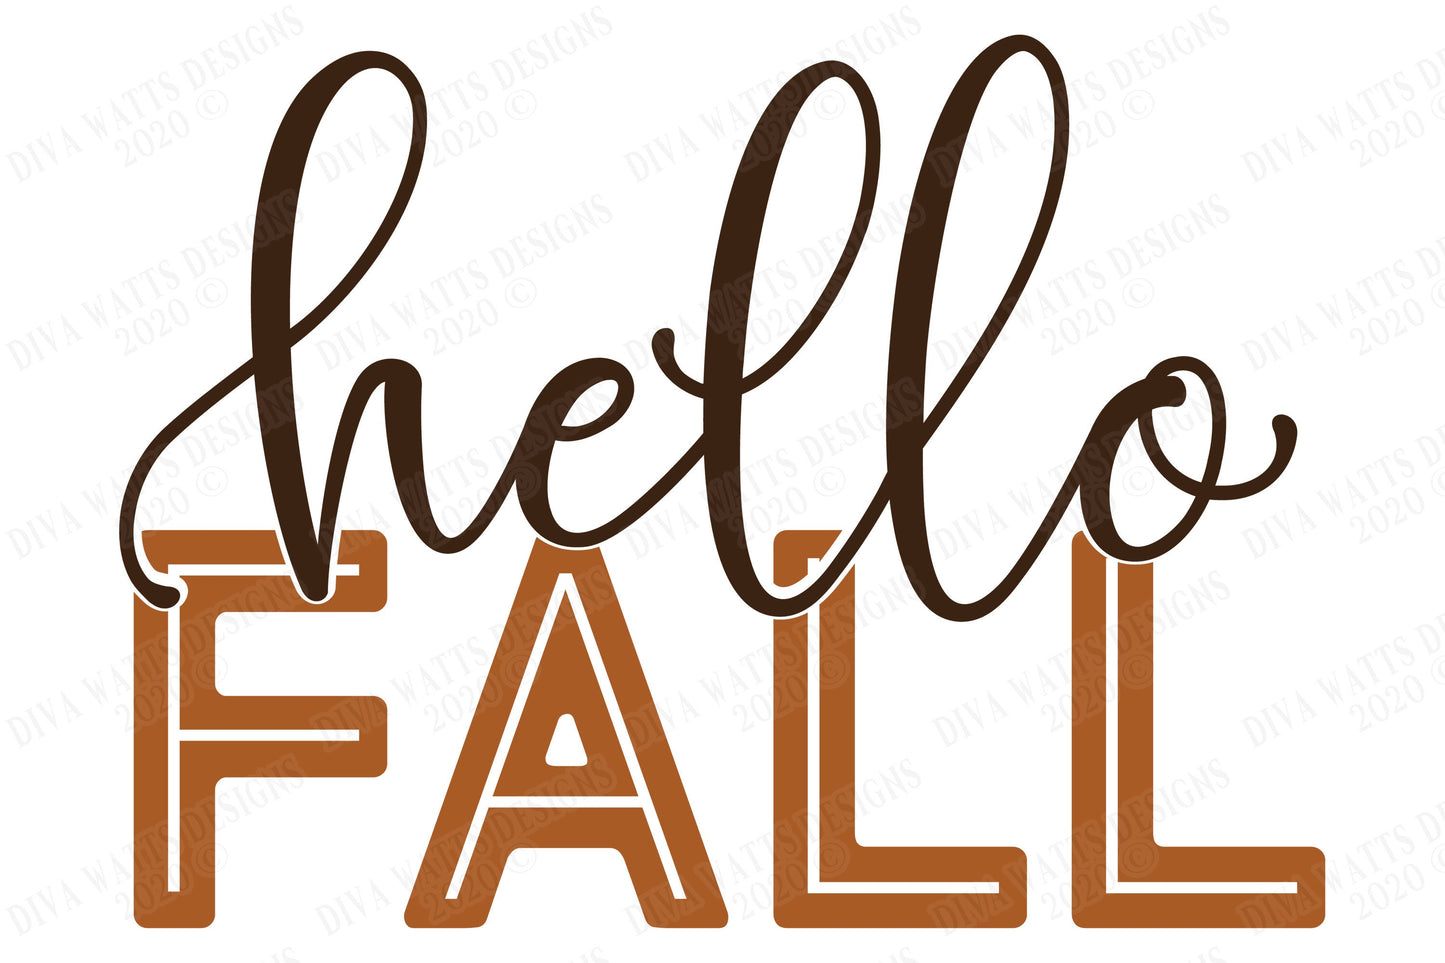 Hello Fall SVG | Fall SVG | Fall Shirt SVG | Fall Sign svg | dxf and more! | Printable